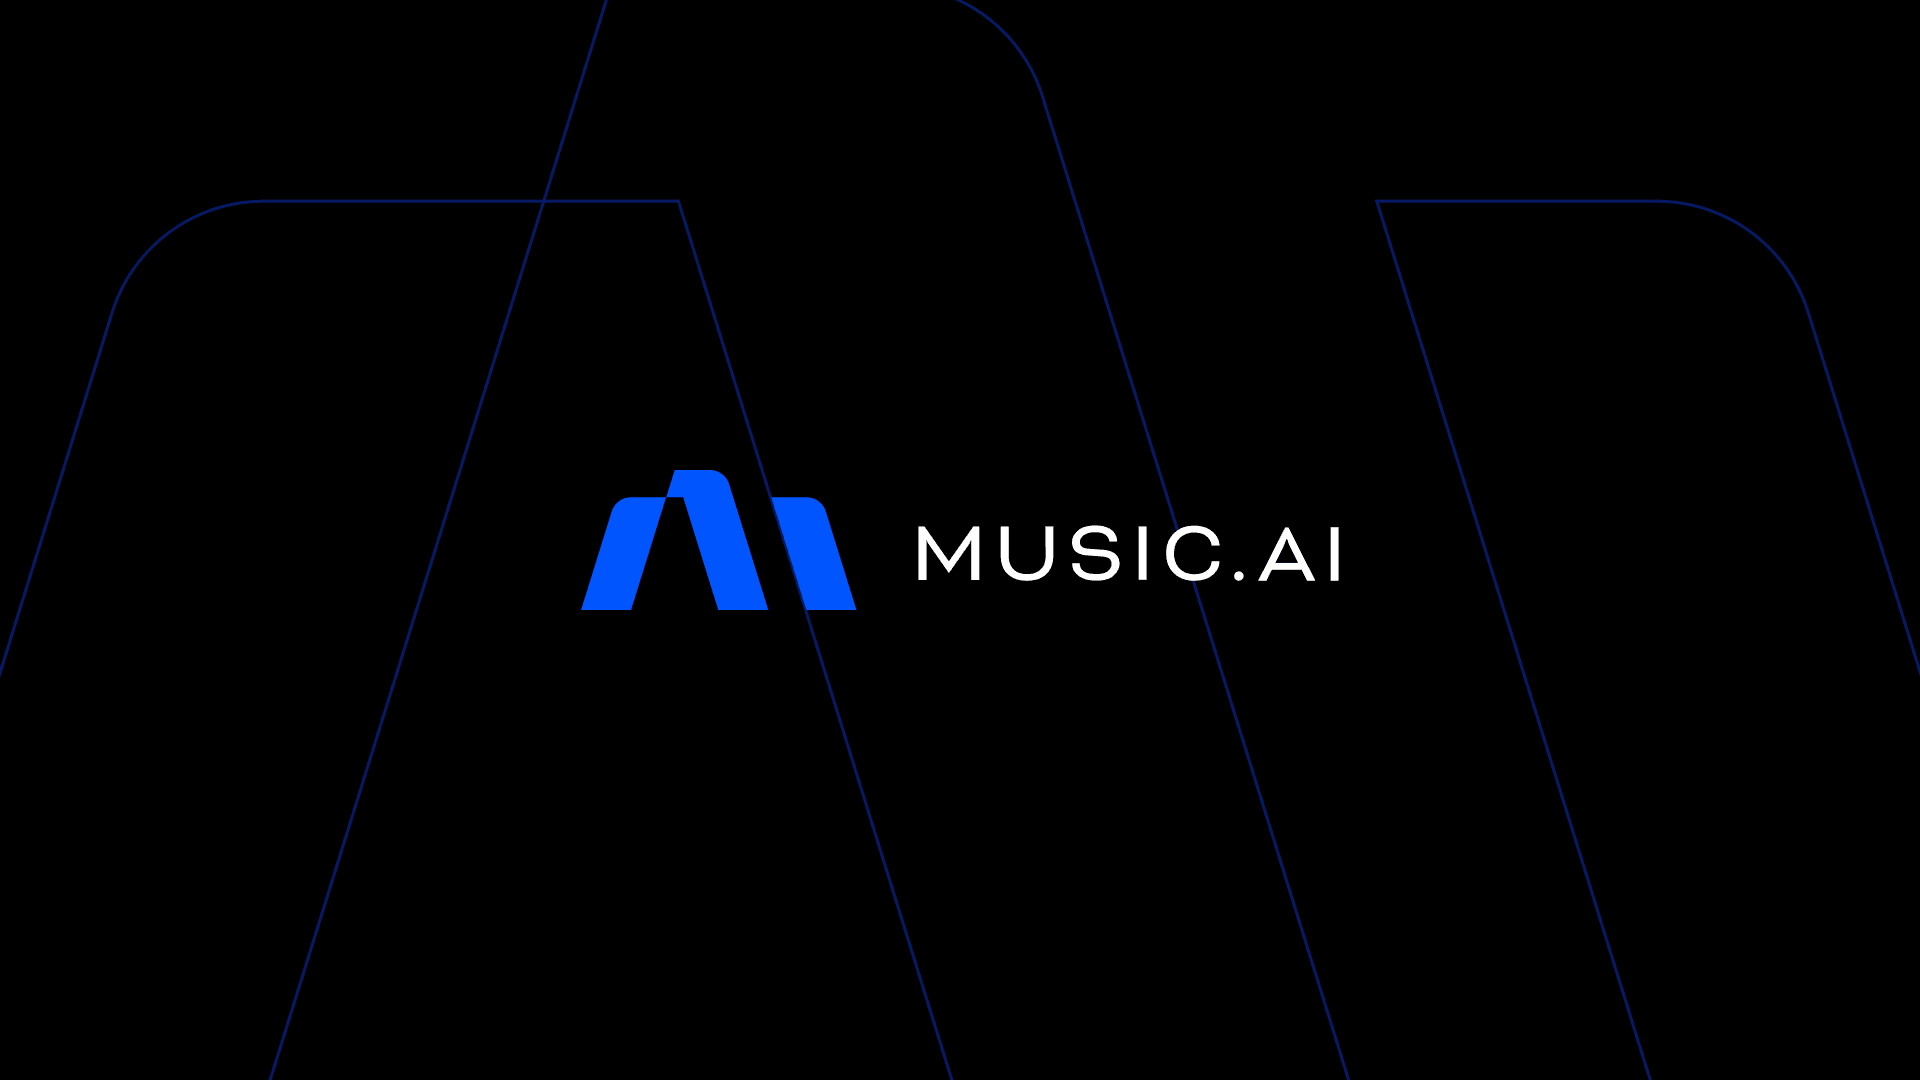 Moises launches Music.AI, opening its platform to accelerate adoption of AI audio